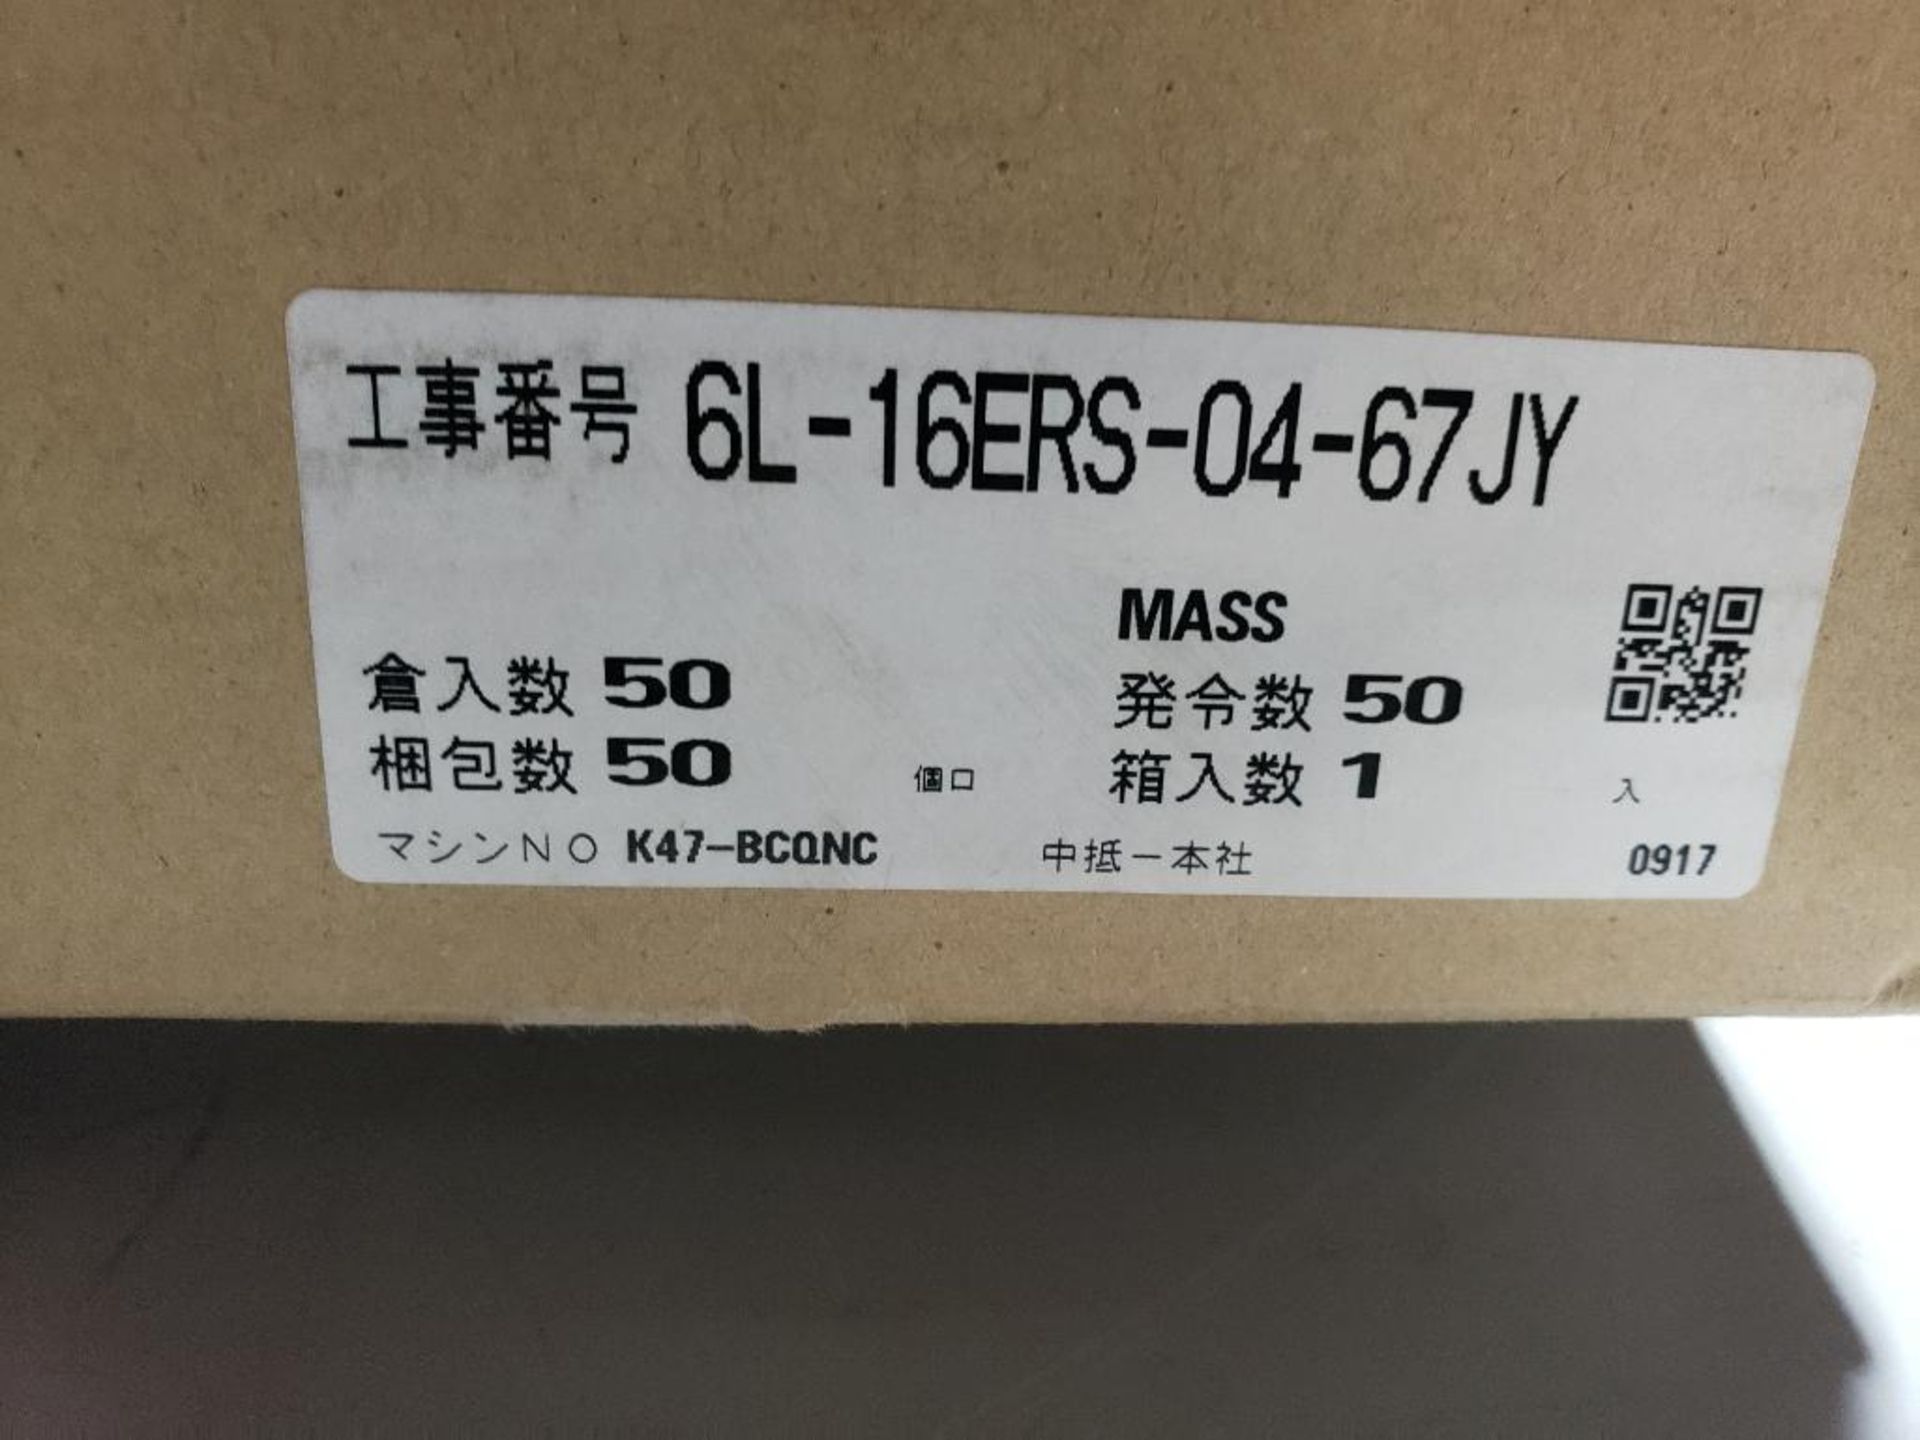 Mitsubishi inverter drive. Part number FR-D720-042-W1. New in box. - Image 3 of 4